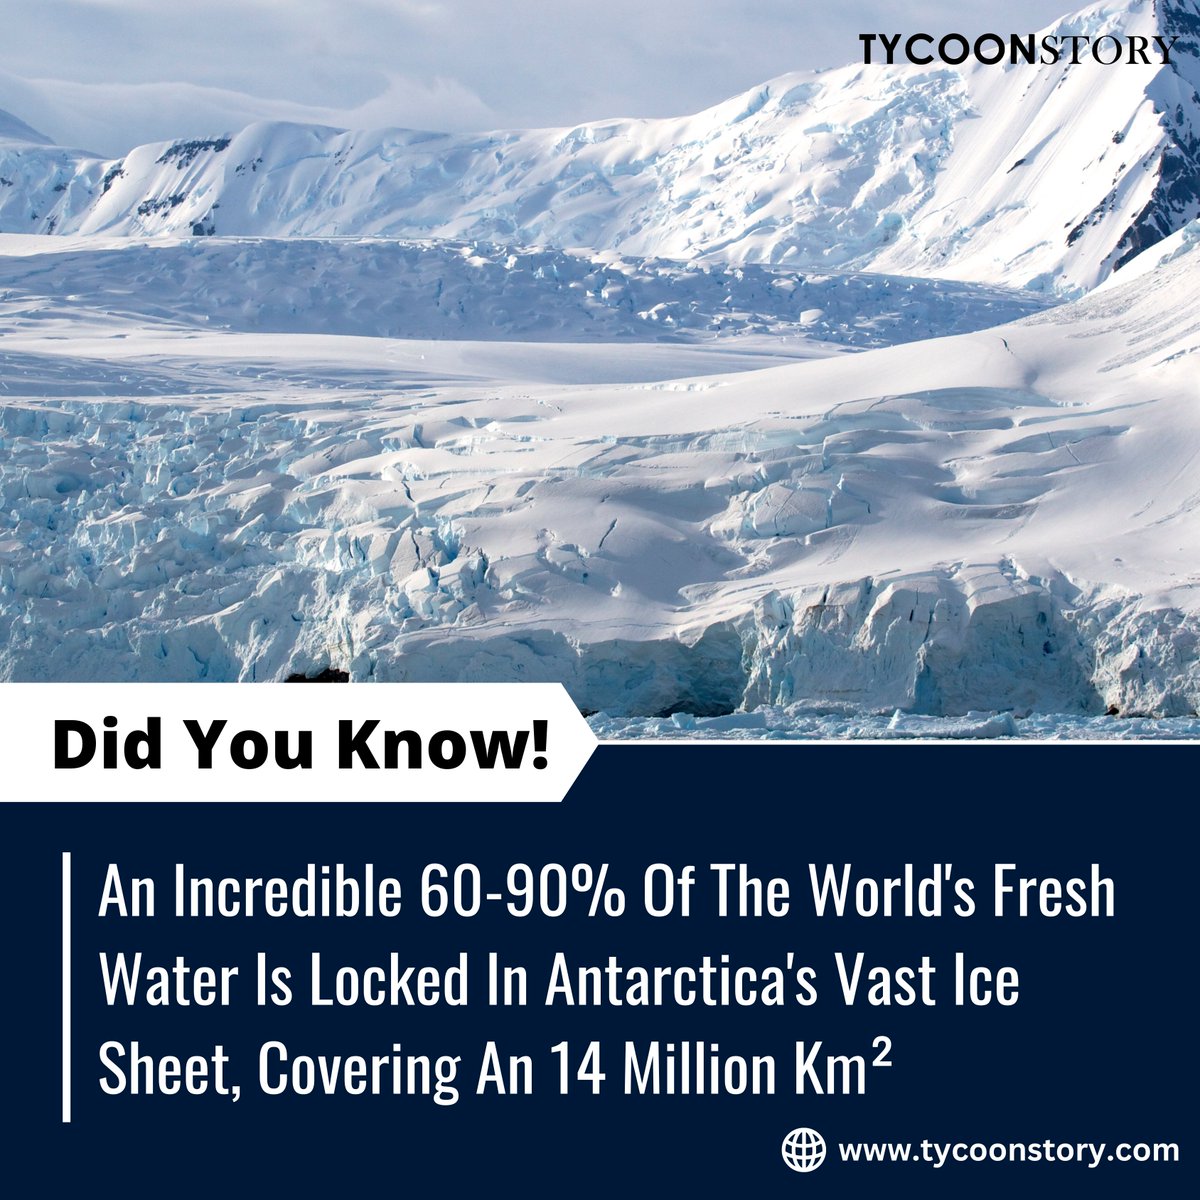 #DidYouKnow

#AntarcticIceSheet #watersecurity #climatechange #PolarIce #waterconservation #naturalwonders #glacialresearch #IcyDelights #frozenreservoirs #earthscience #hydrology #AntarcticDiscovery #waterawareness #ecosystempreservation